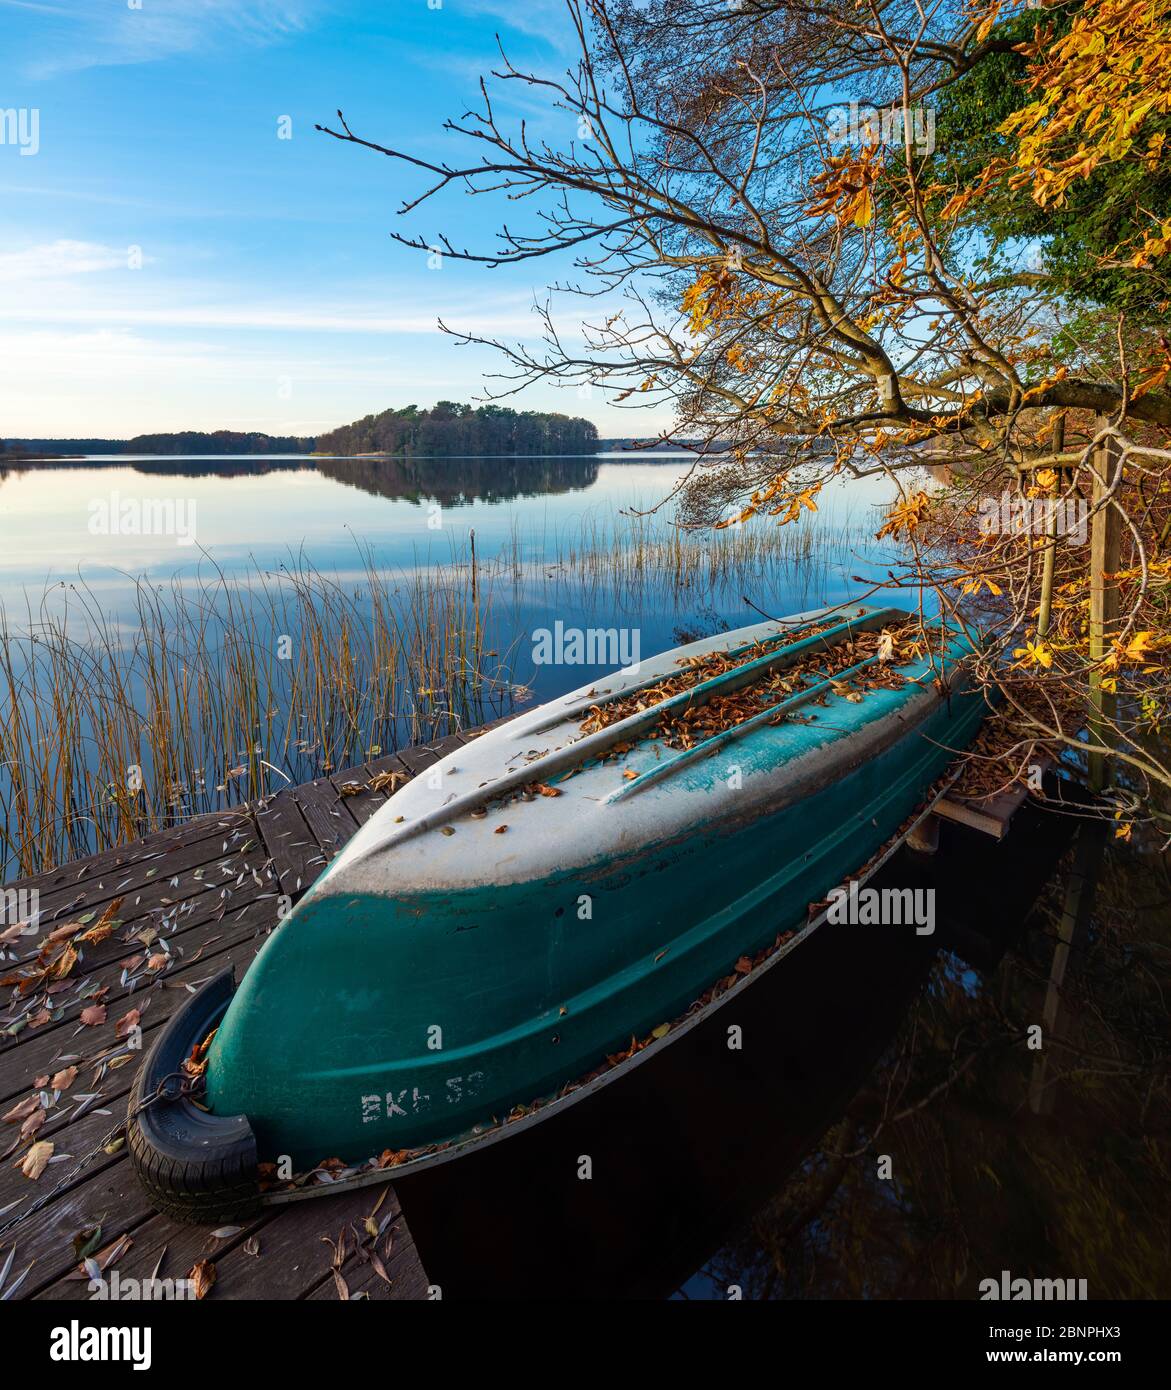 Germany, Brandenburg, Lychen, Quiet evening at the Great Lychensee in autumn, rowboat lies upside down on jetty, colorful foliage Stock Photo